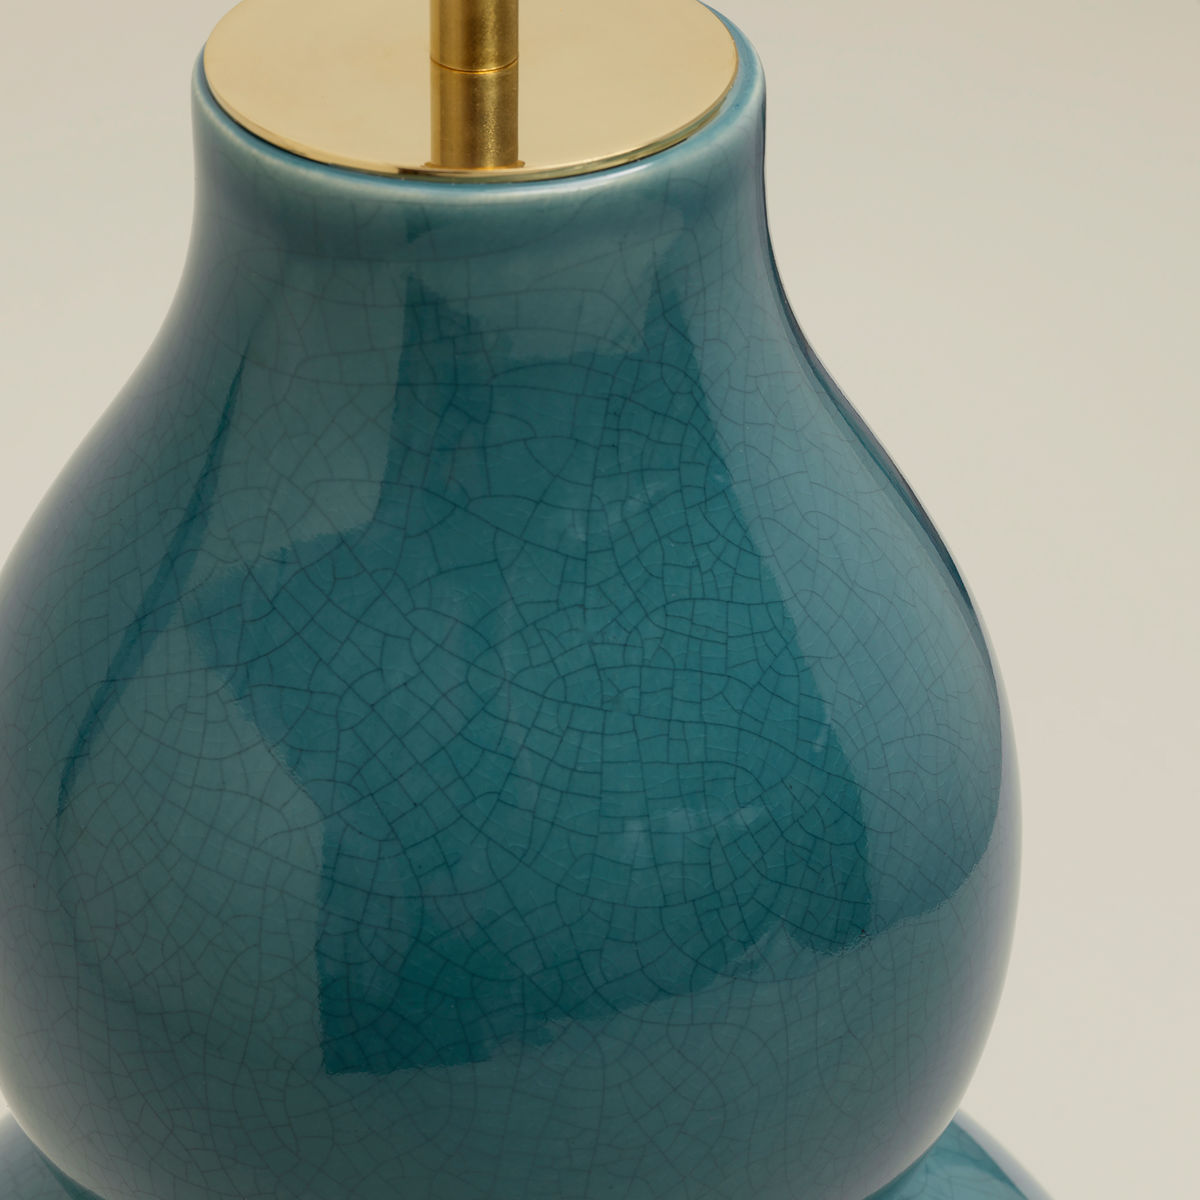 Detail of Gourd Shaped Vase Table Lamp in Crackled Teal Green